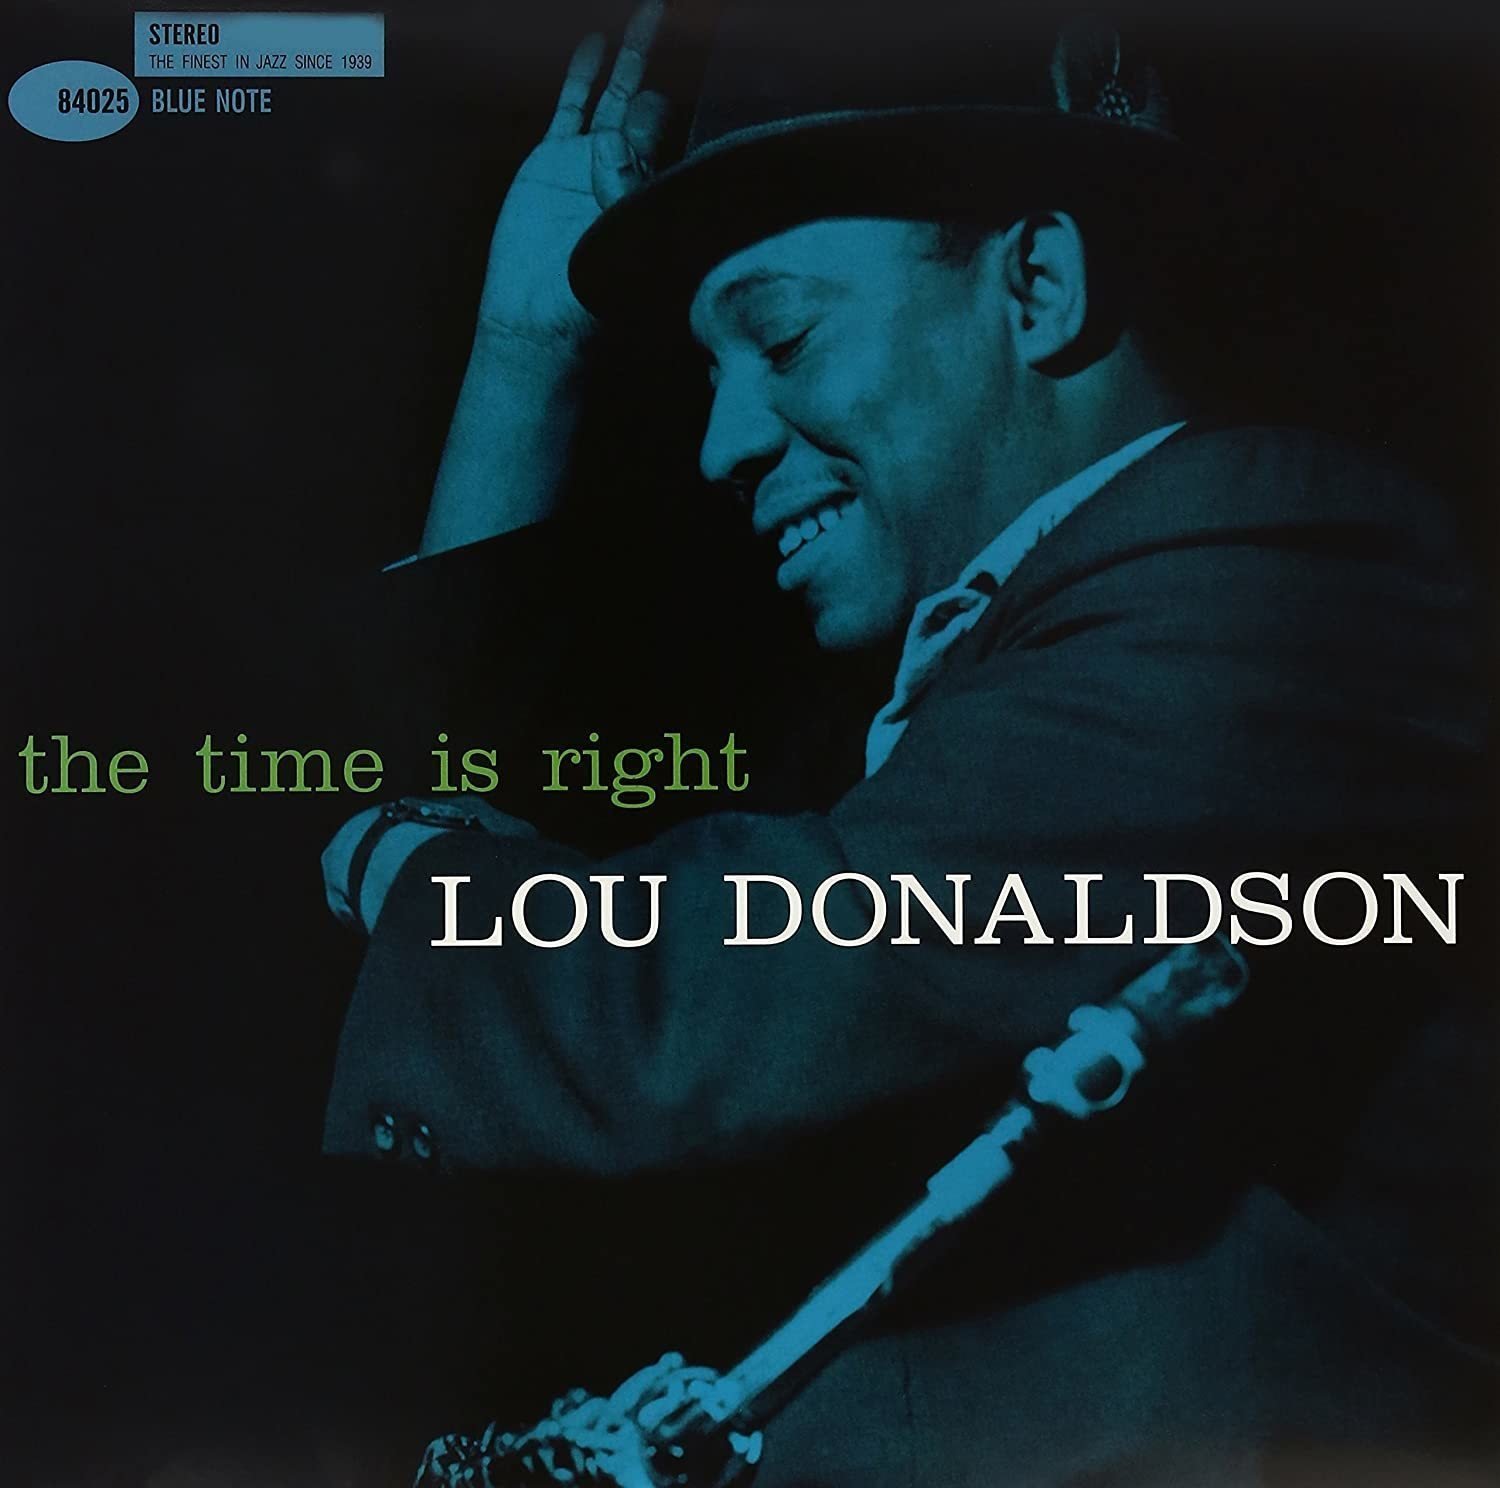 Vinyl Record Lou Donaldson - The Time Is Right (2 LP)